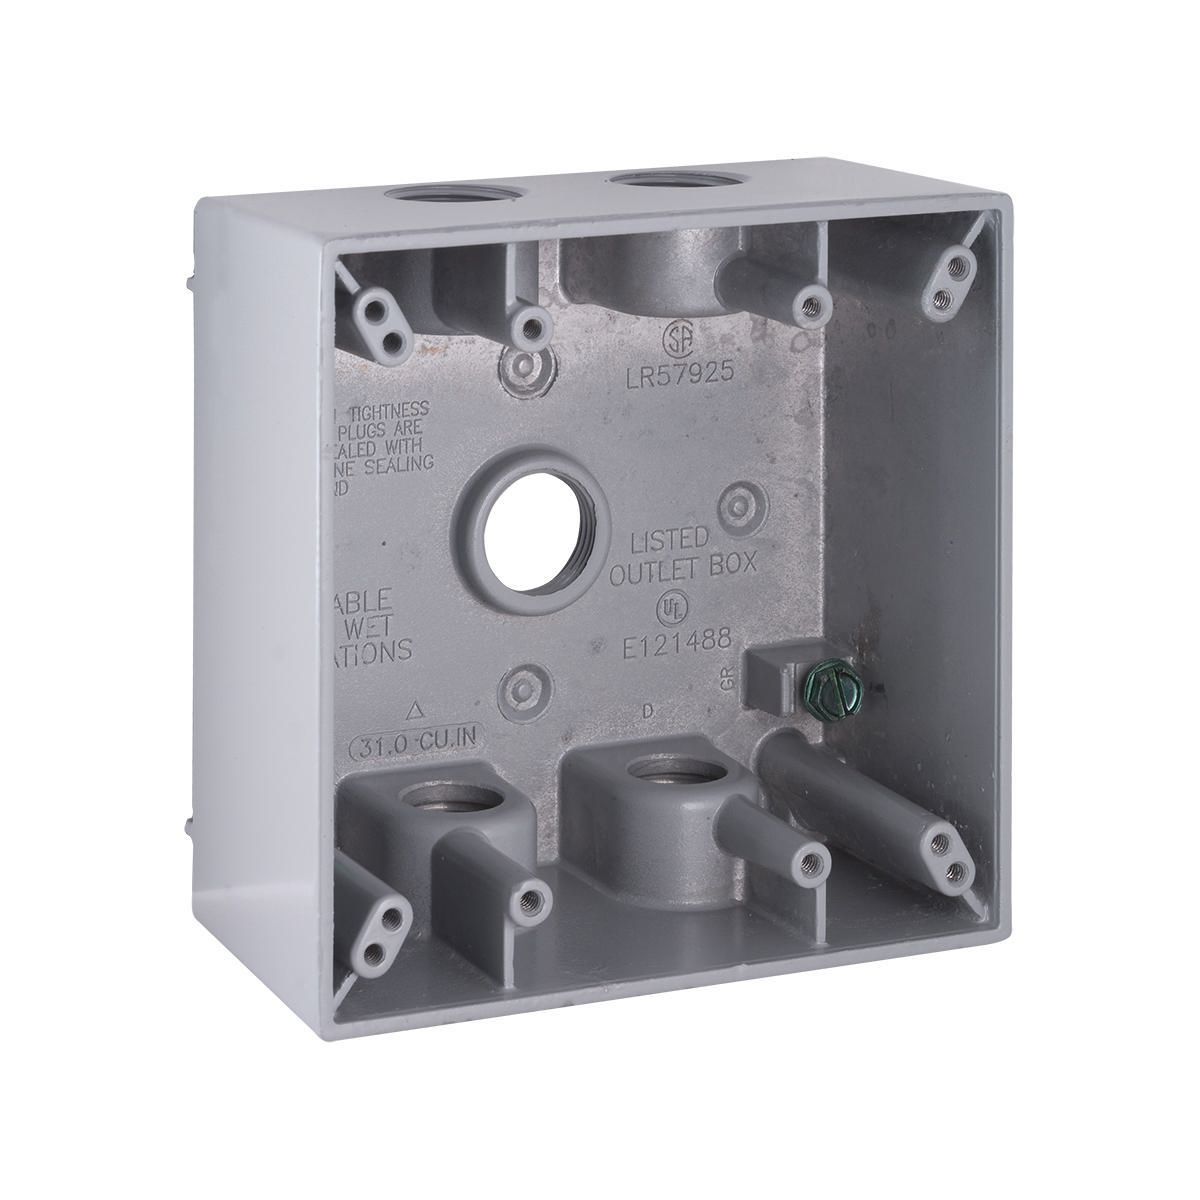 2G WP BOX (5) 1/2 IN. OUTLETS - GRAY